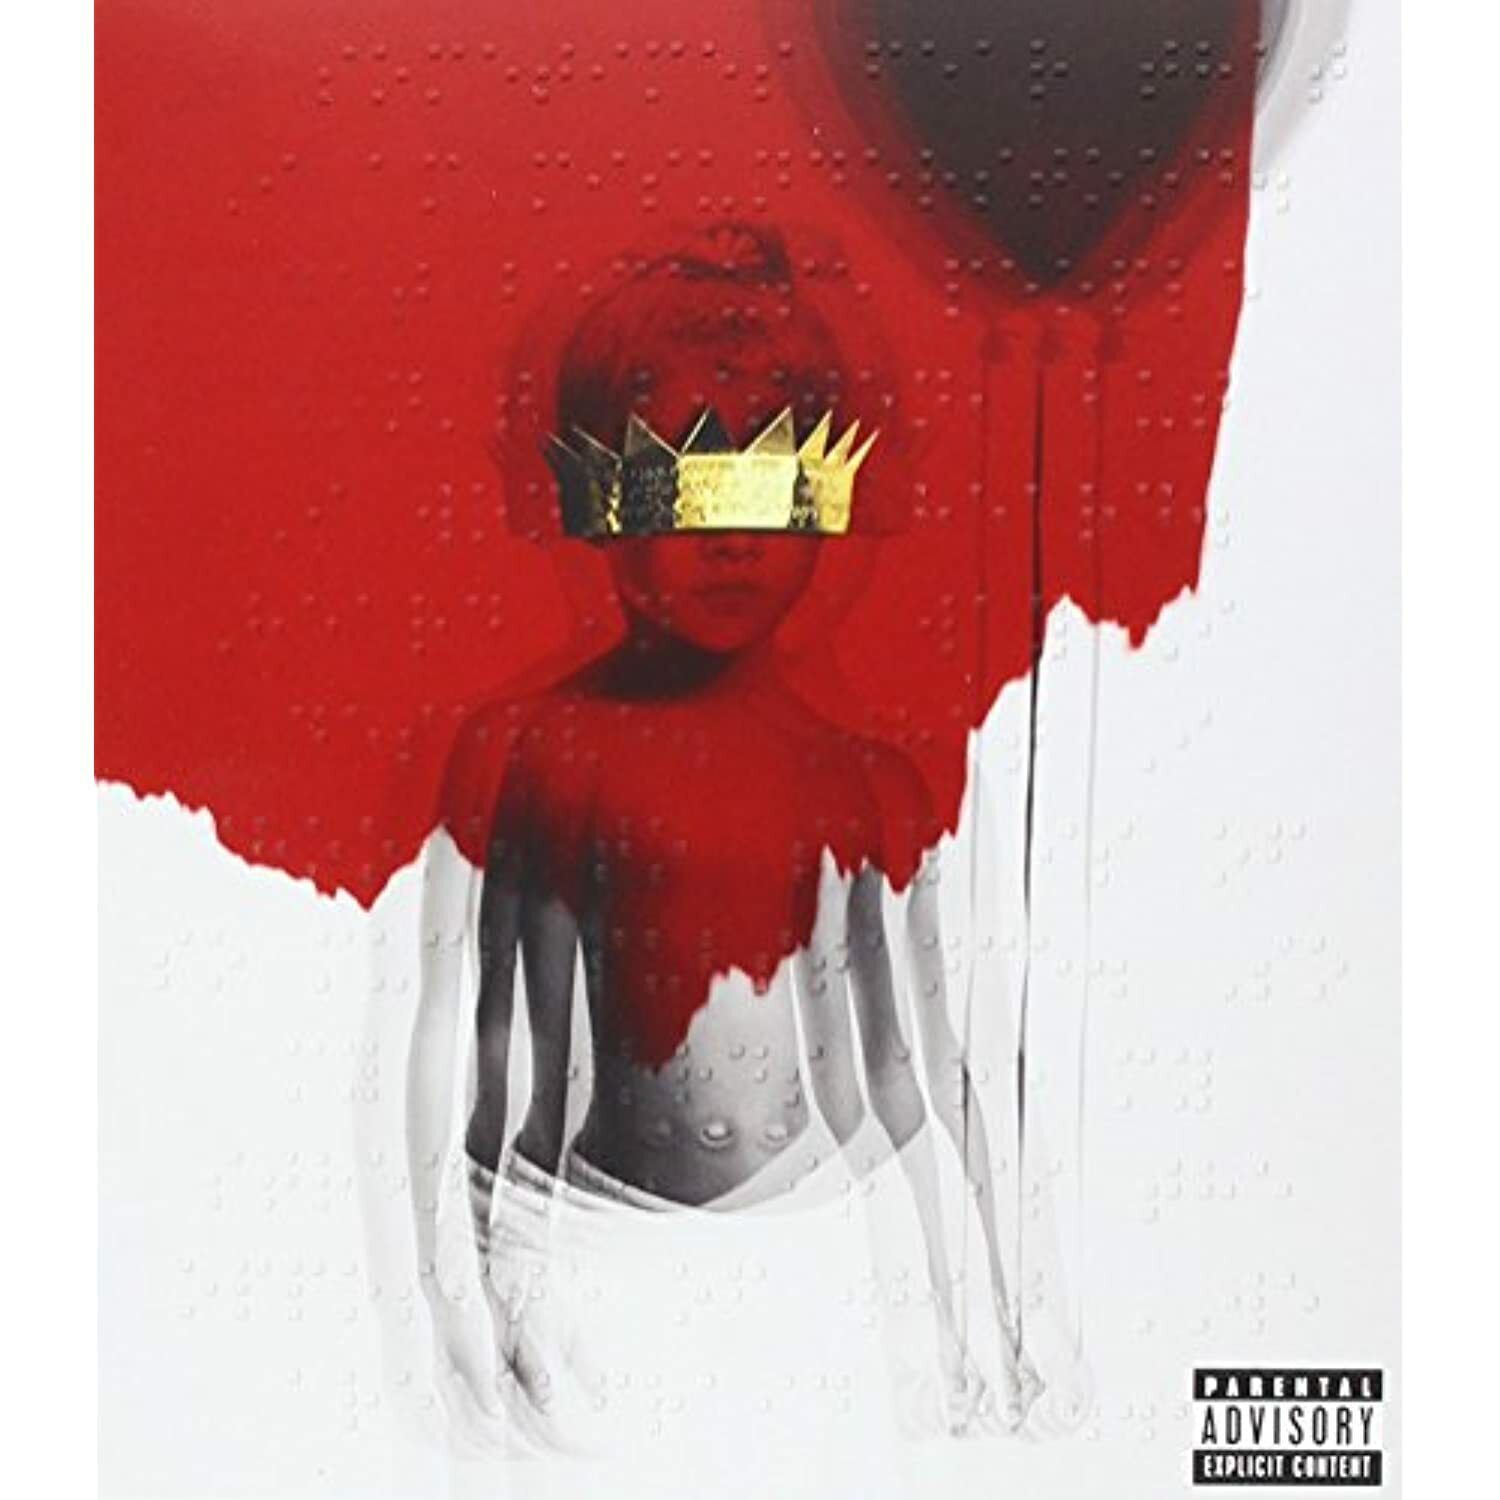 Anti [Deluxe Version] [PA] by Rihanna (CD, Feb-2016, Roc Nation)